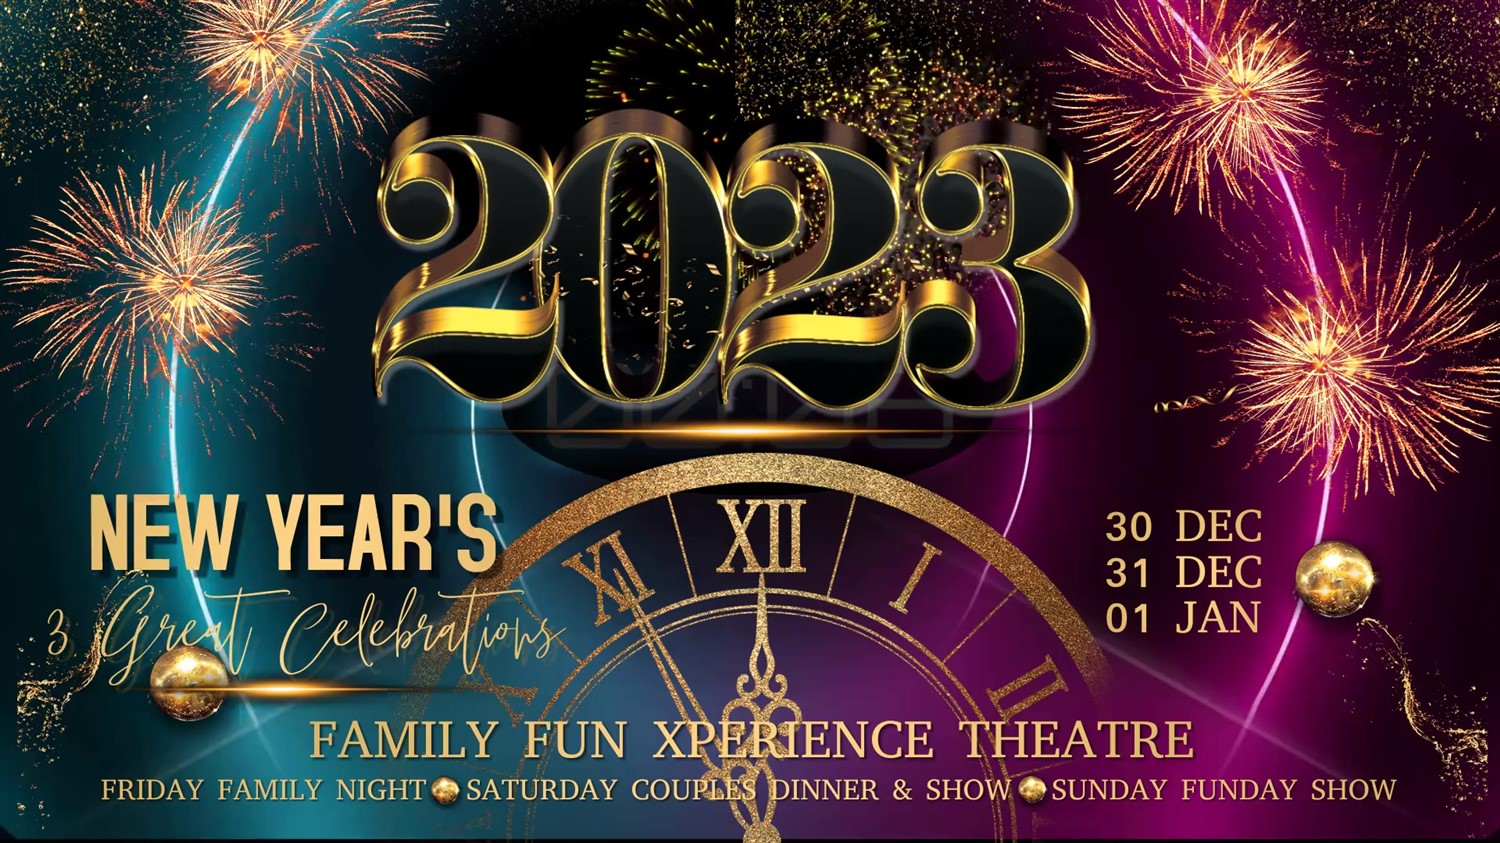 New Year's Eve Couple's Event Dinner, Game Show, Music, and Celebration! (Couple's Only, 18 & Over) on dic. 31, 19:30@FFX Theatre - Elegir asientoCompra entradas y obtén información enFamily Fun Xperience tickets.ffxshow.org